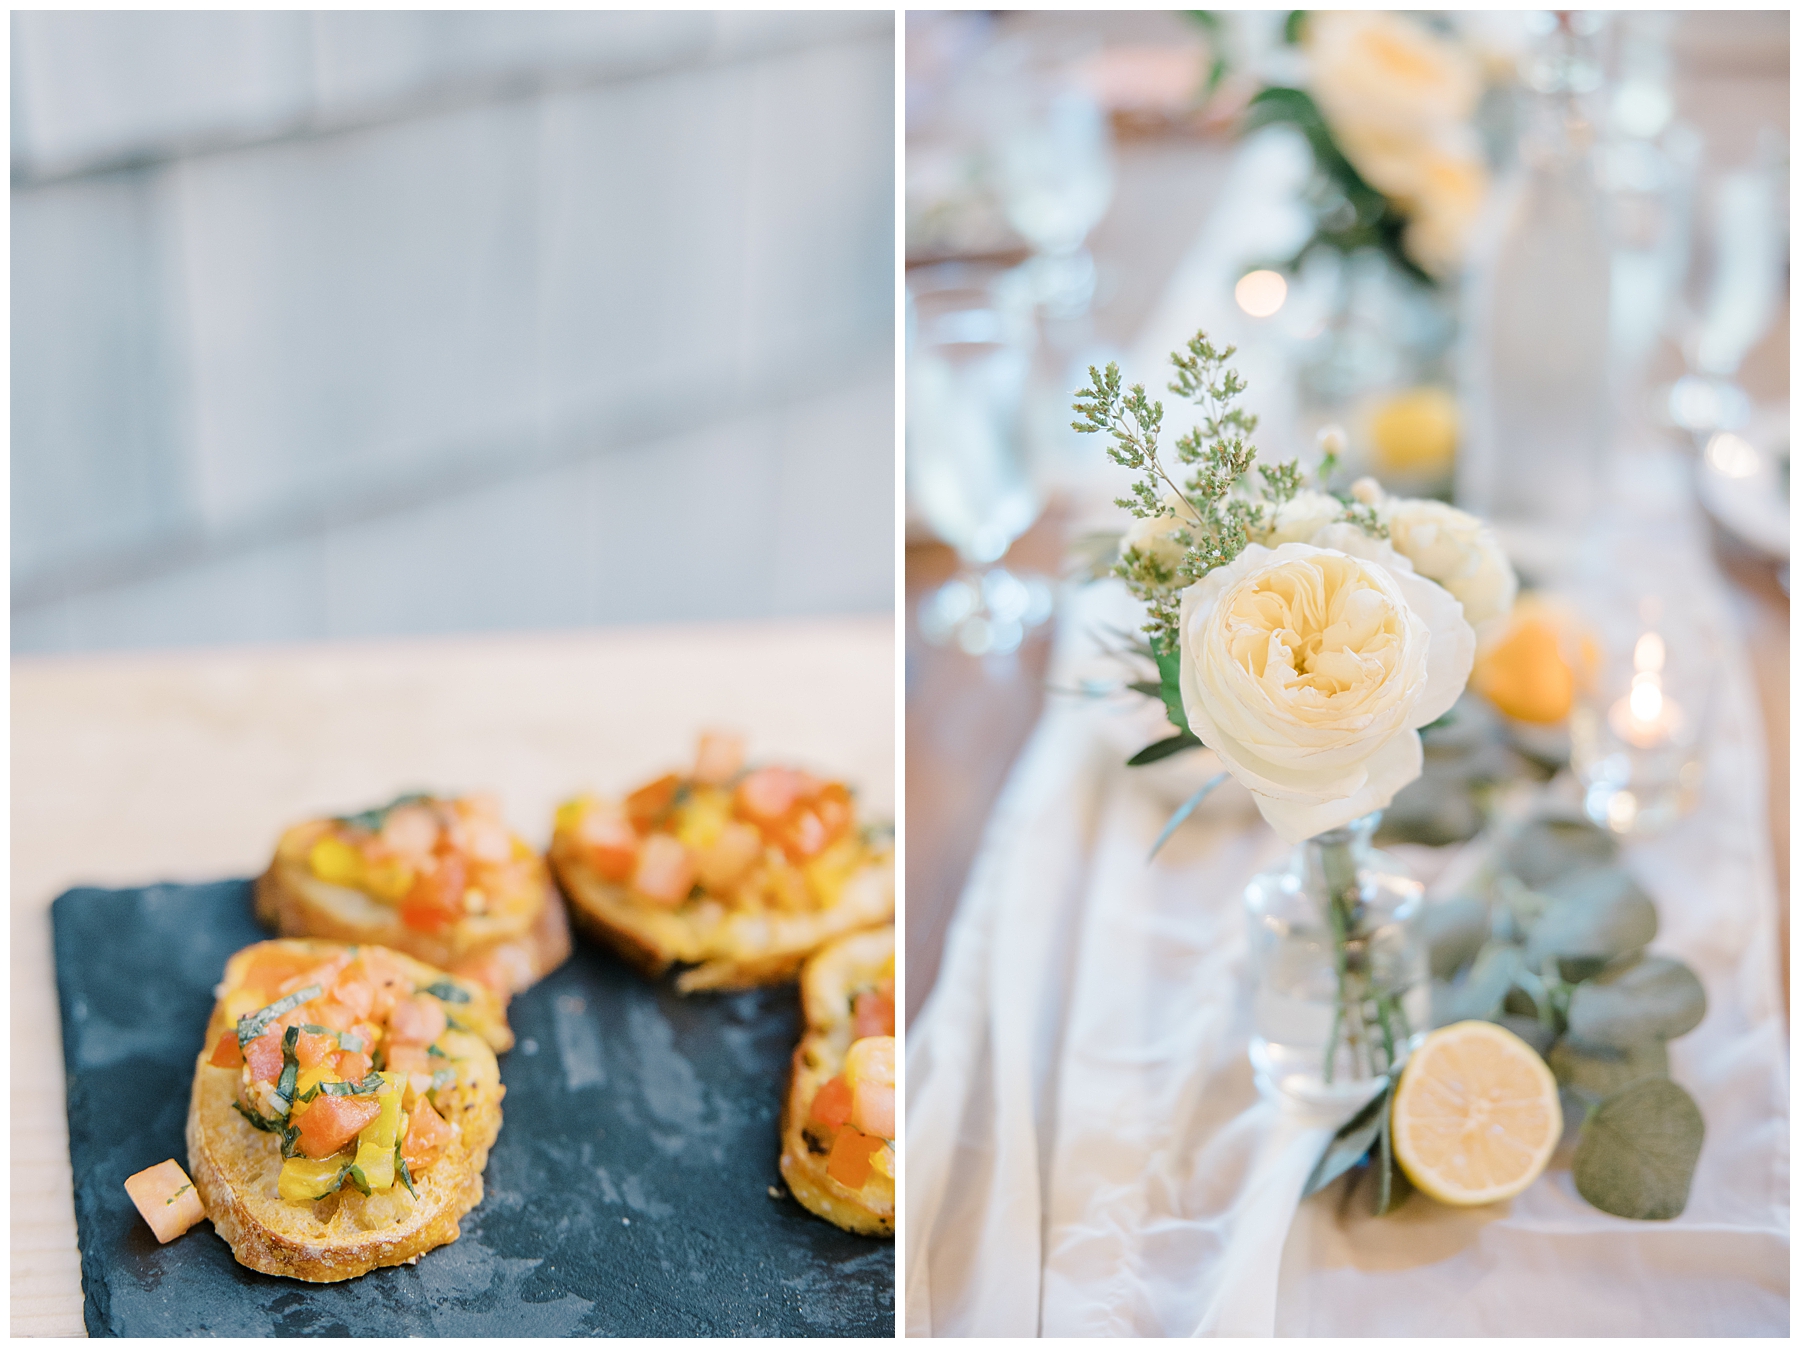 wedding appetizers and table setting